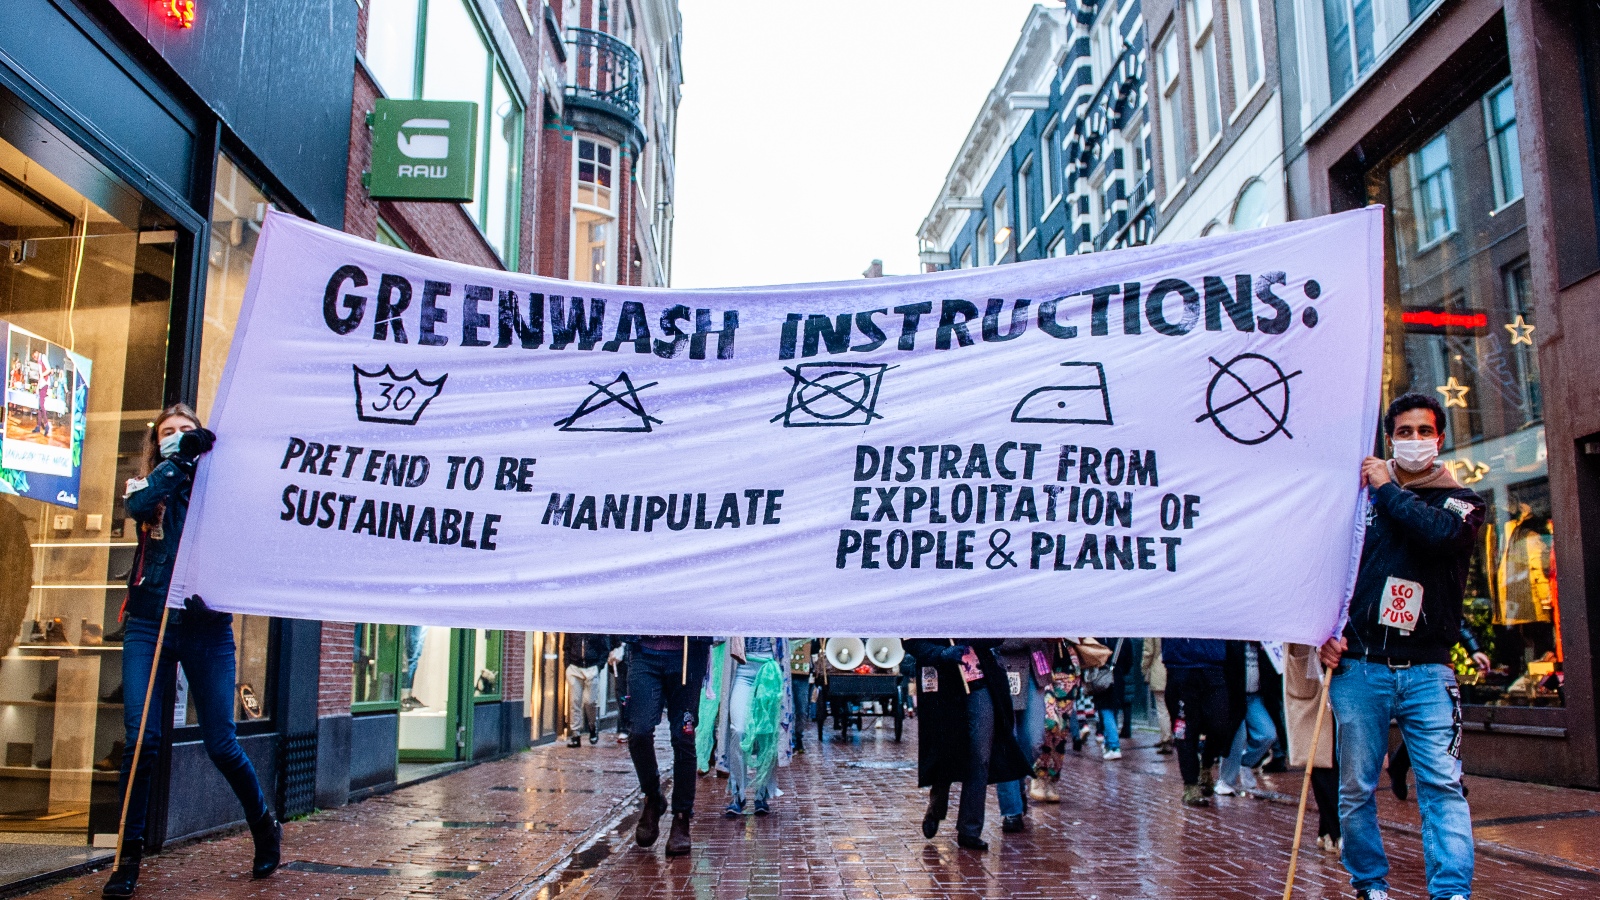 A protest banner spells out instructions for greenwashing